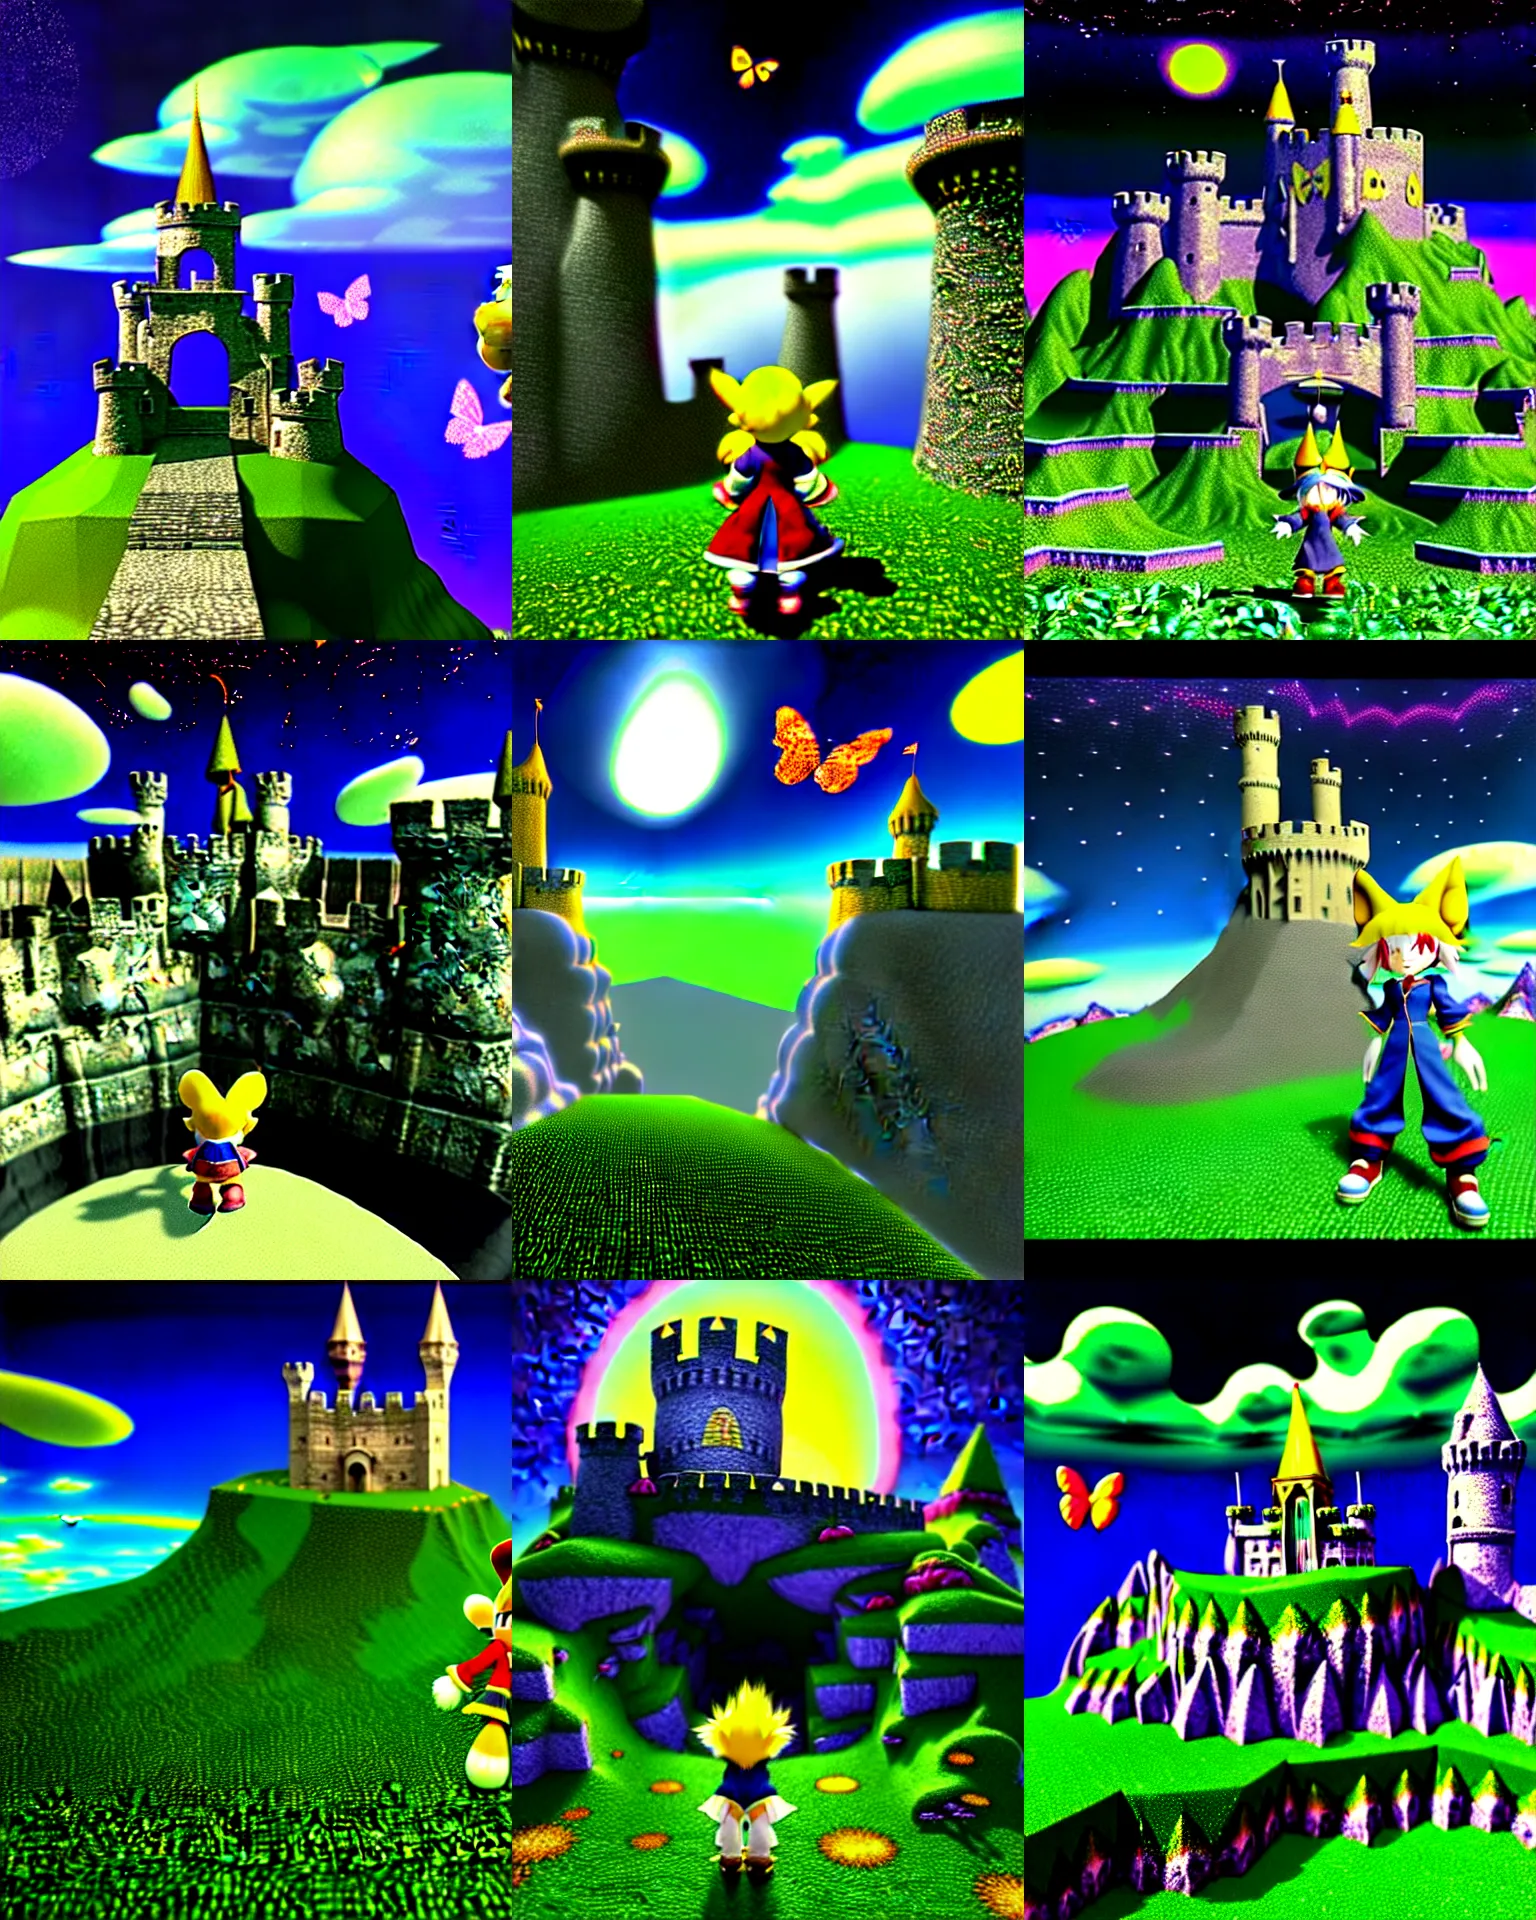 Prompt: 3 d render of chibi medieval wizard klonoa standing in raytraced mountain landscape with castle ruins against a psychedelic surreal background with 3 d butterflies and 3 d flowers n the style of 1 9 9 0's cg graphics against the cloudy night sky, lsd dream emulator psx, 3 d rendered y 2 k aesthetic by ichiro tanida, 3 do magazine, wide shot